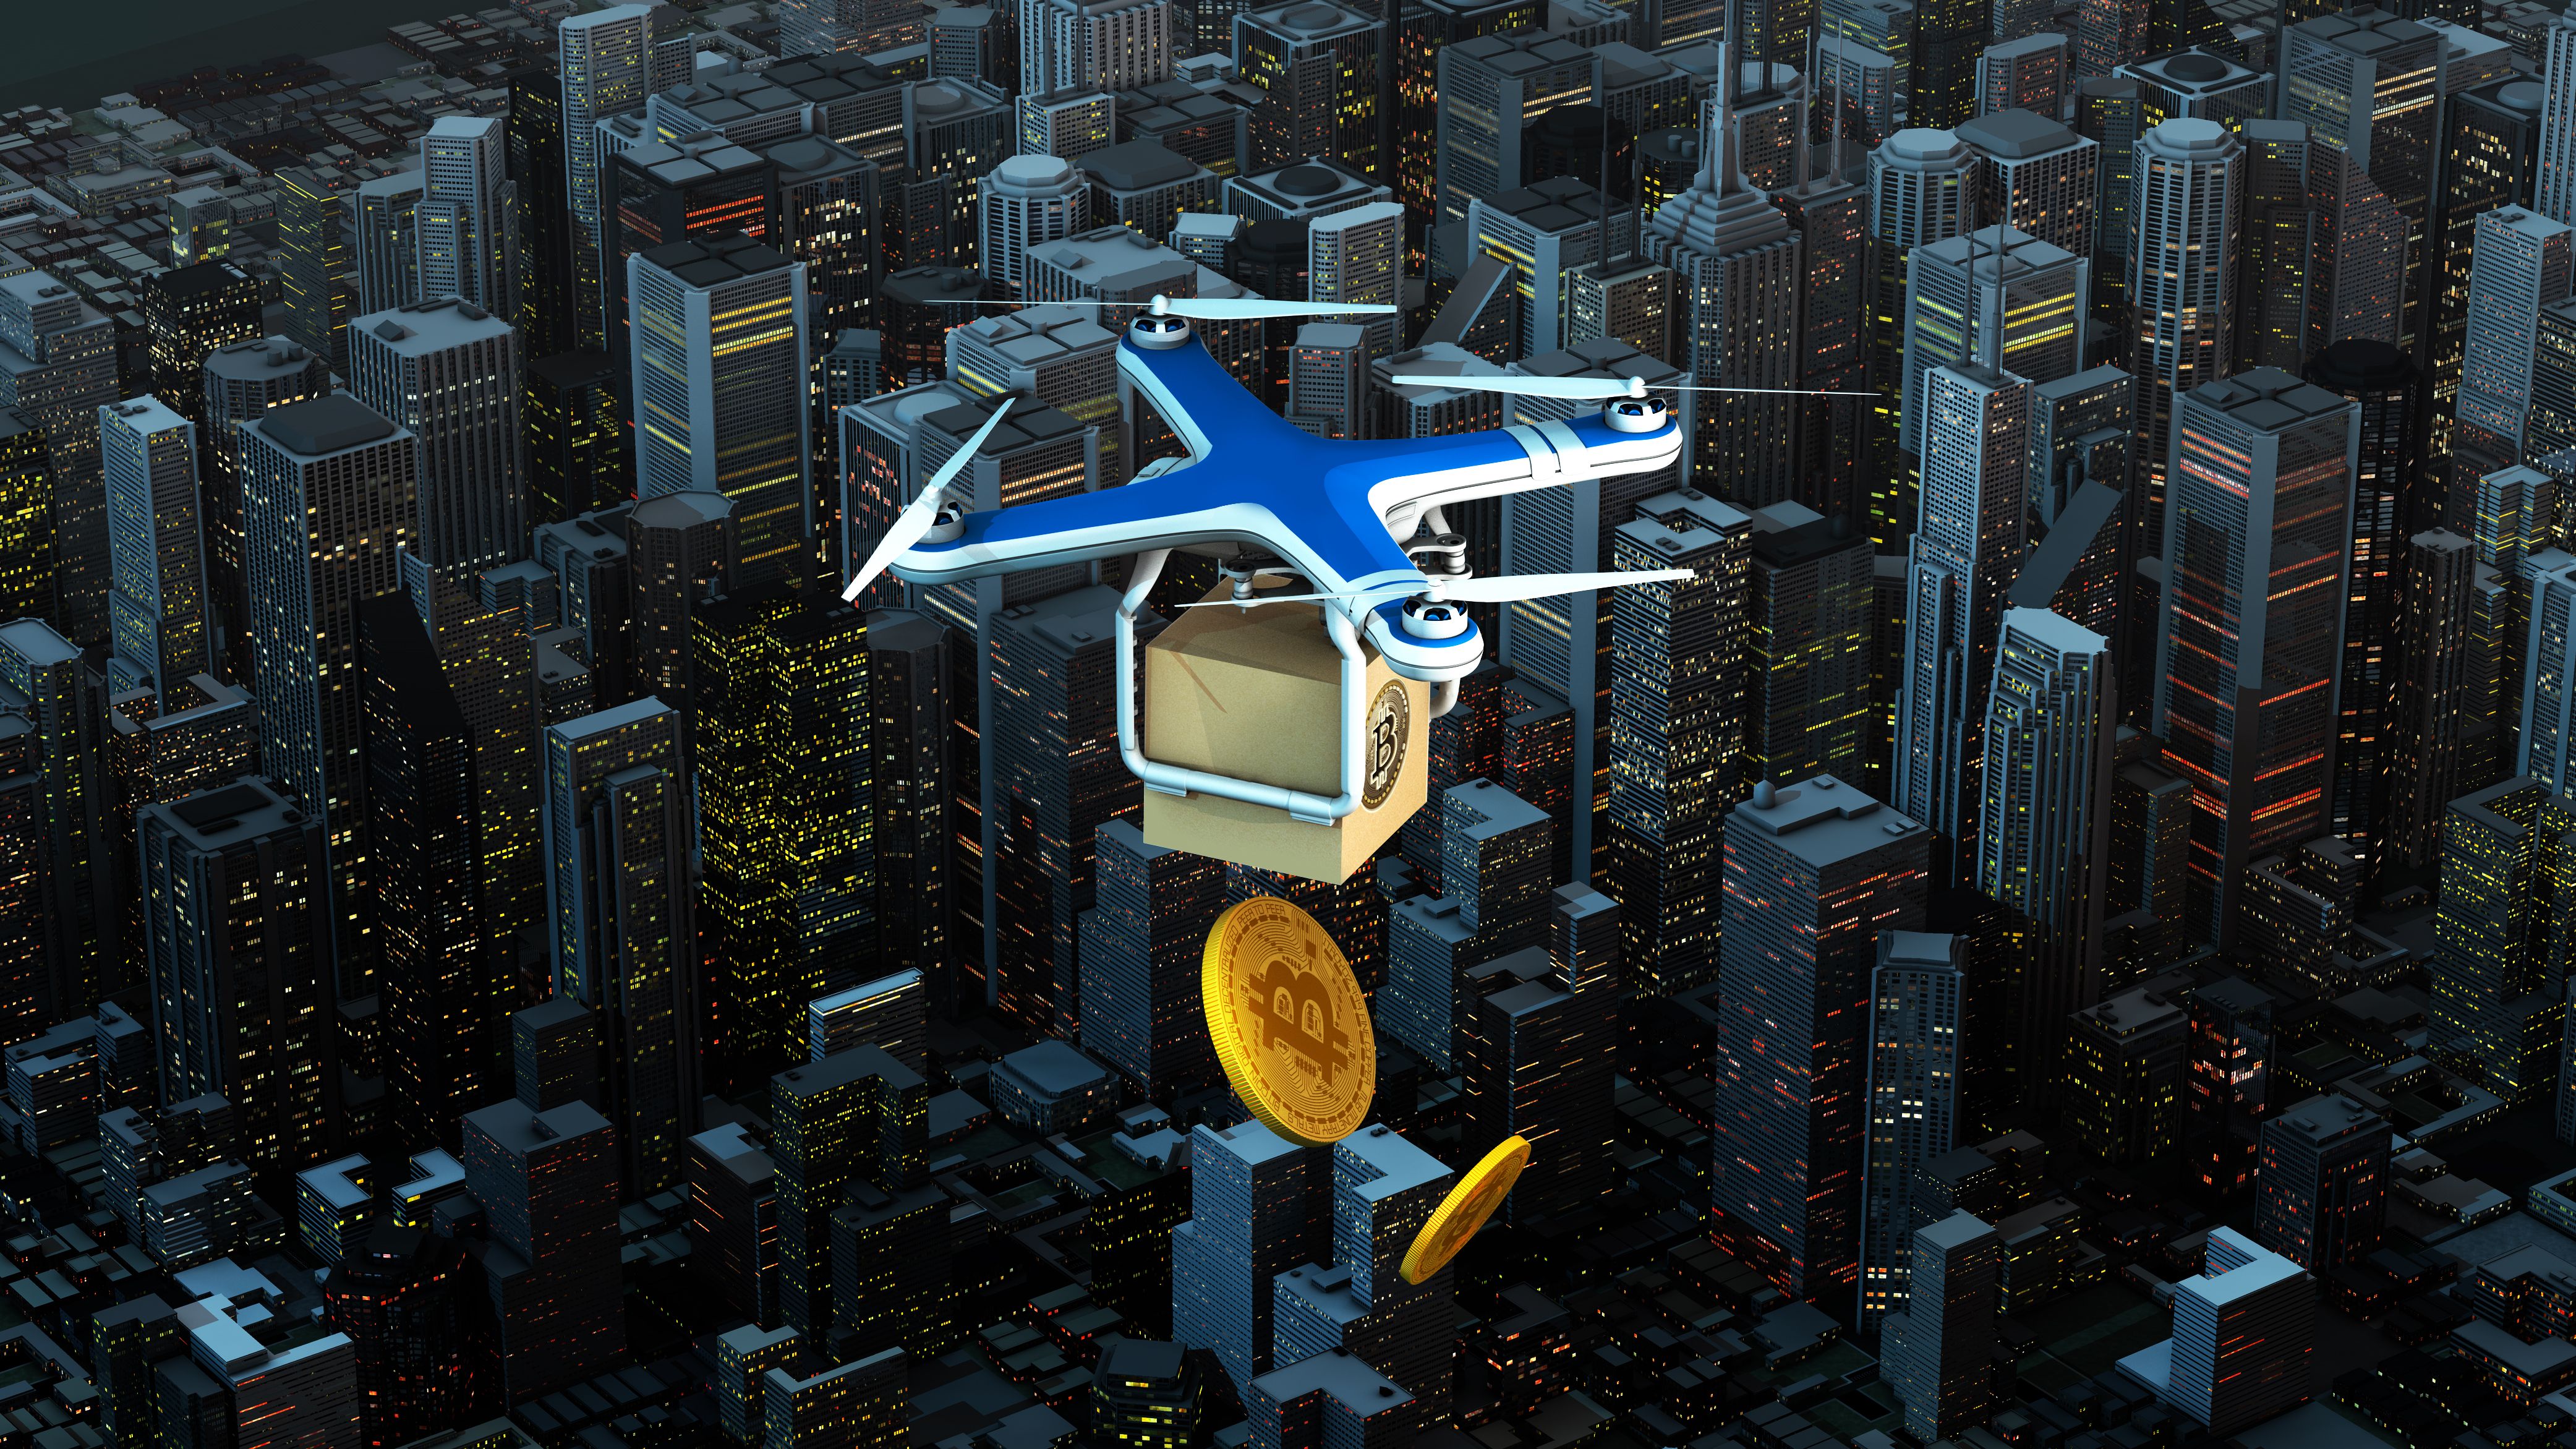 A drone dropping crypto coins over a city.